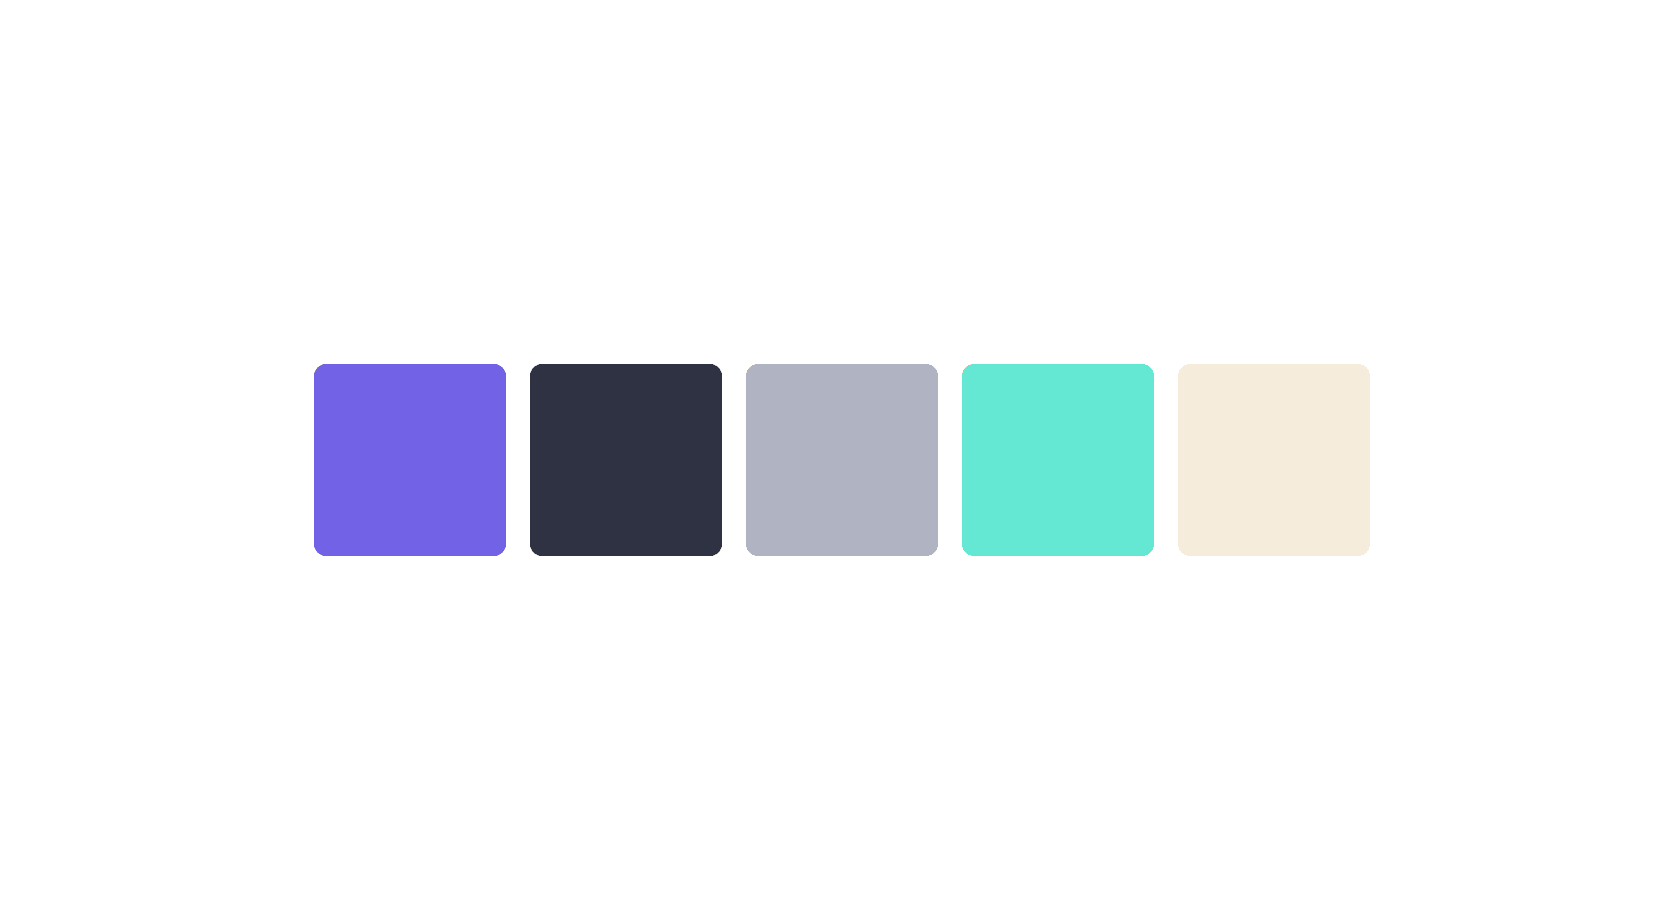 The colour palette from the previous post